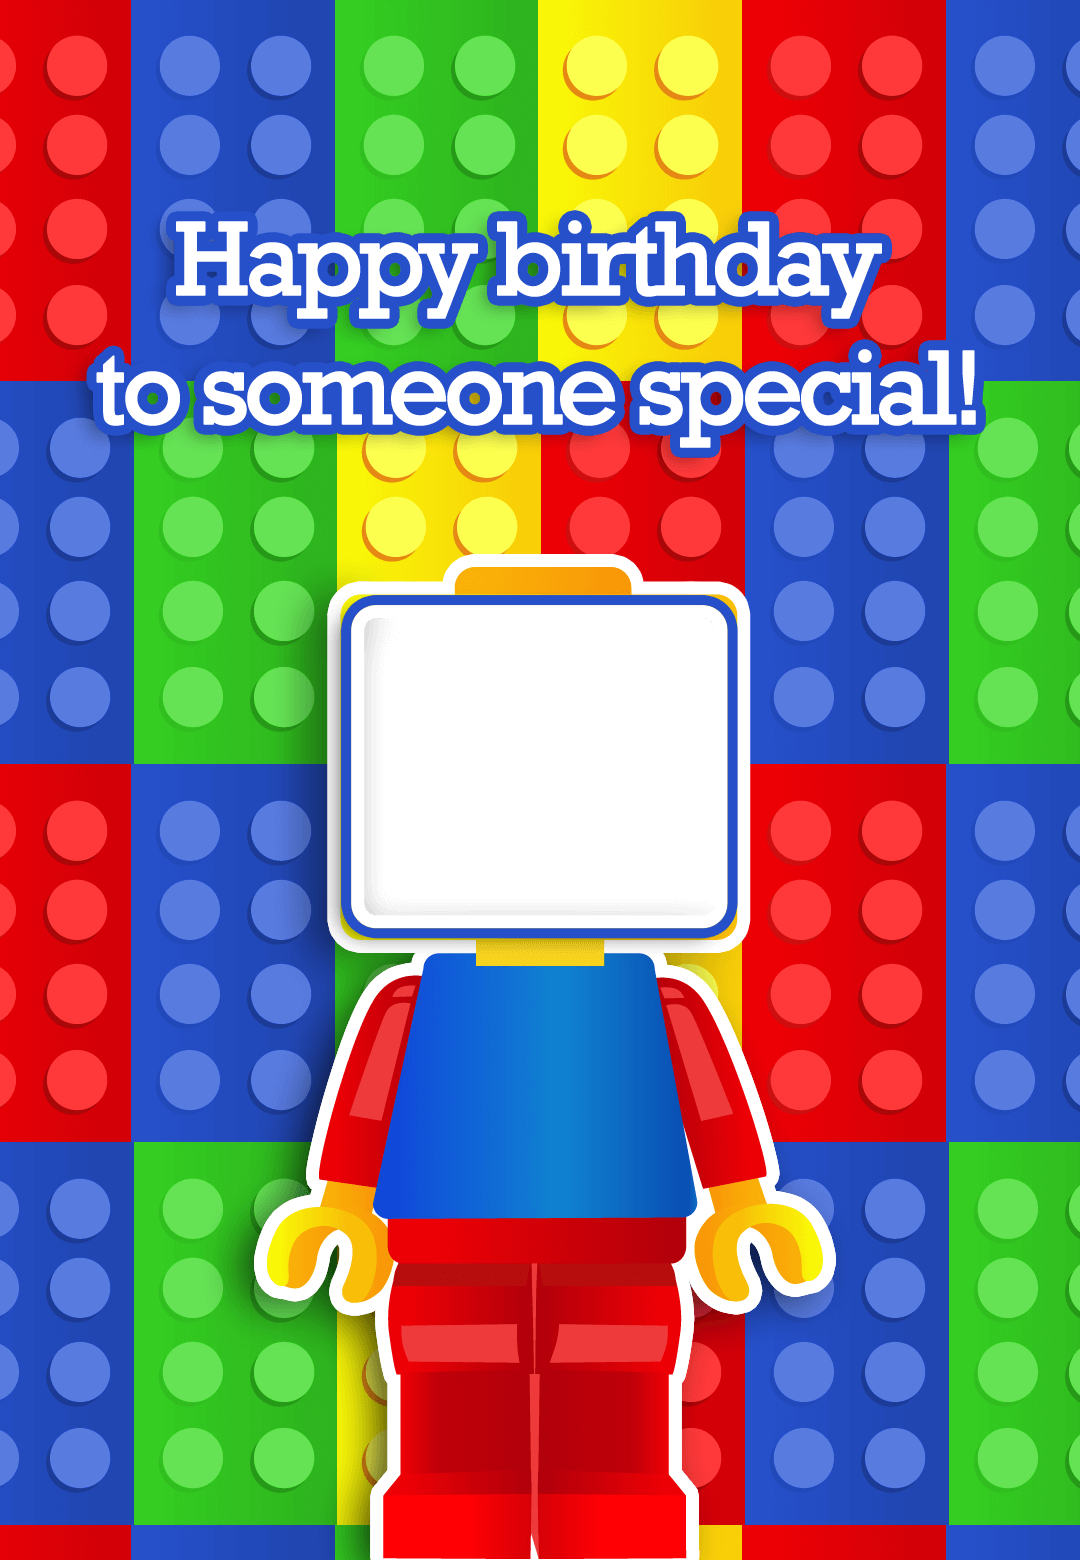 To Someone Special Free Birthday Card Greetings Island Lego Birthday Cards Lego Birthday Birthday Card Printable